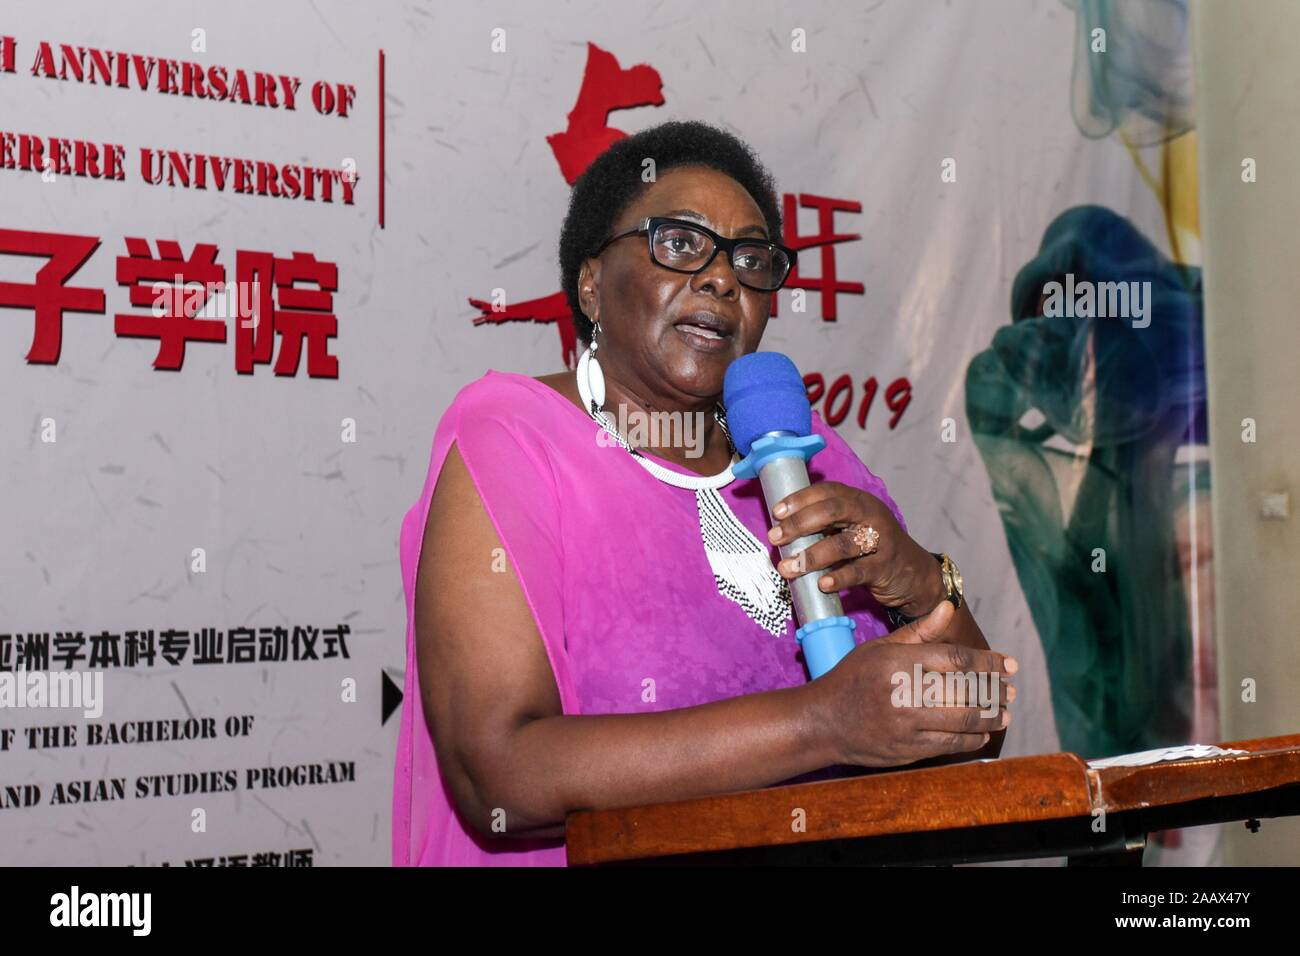 Kampala, Uganda. 23rd Nov, 2019. Mary Karoro, Uganda's minister in charge of general duties at the Office of Prime Minister, speaks during an event celebrating the 5th anniversary of the founding of the institute, in Kampala, Uganda, Nov. 23, 2019. Confucius Institute at Makerere University, Uganda's top university, on Saturday celebrated its fifth anniversary. The institution, as the nexus of Chinese language teaching, is playing a major role for cultural exchange between Uganda and China. Credit: Hajarah Nalwadda/Xinhua/Alamy Live News Stock Photo